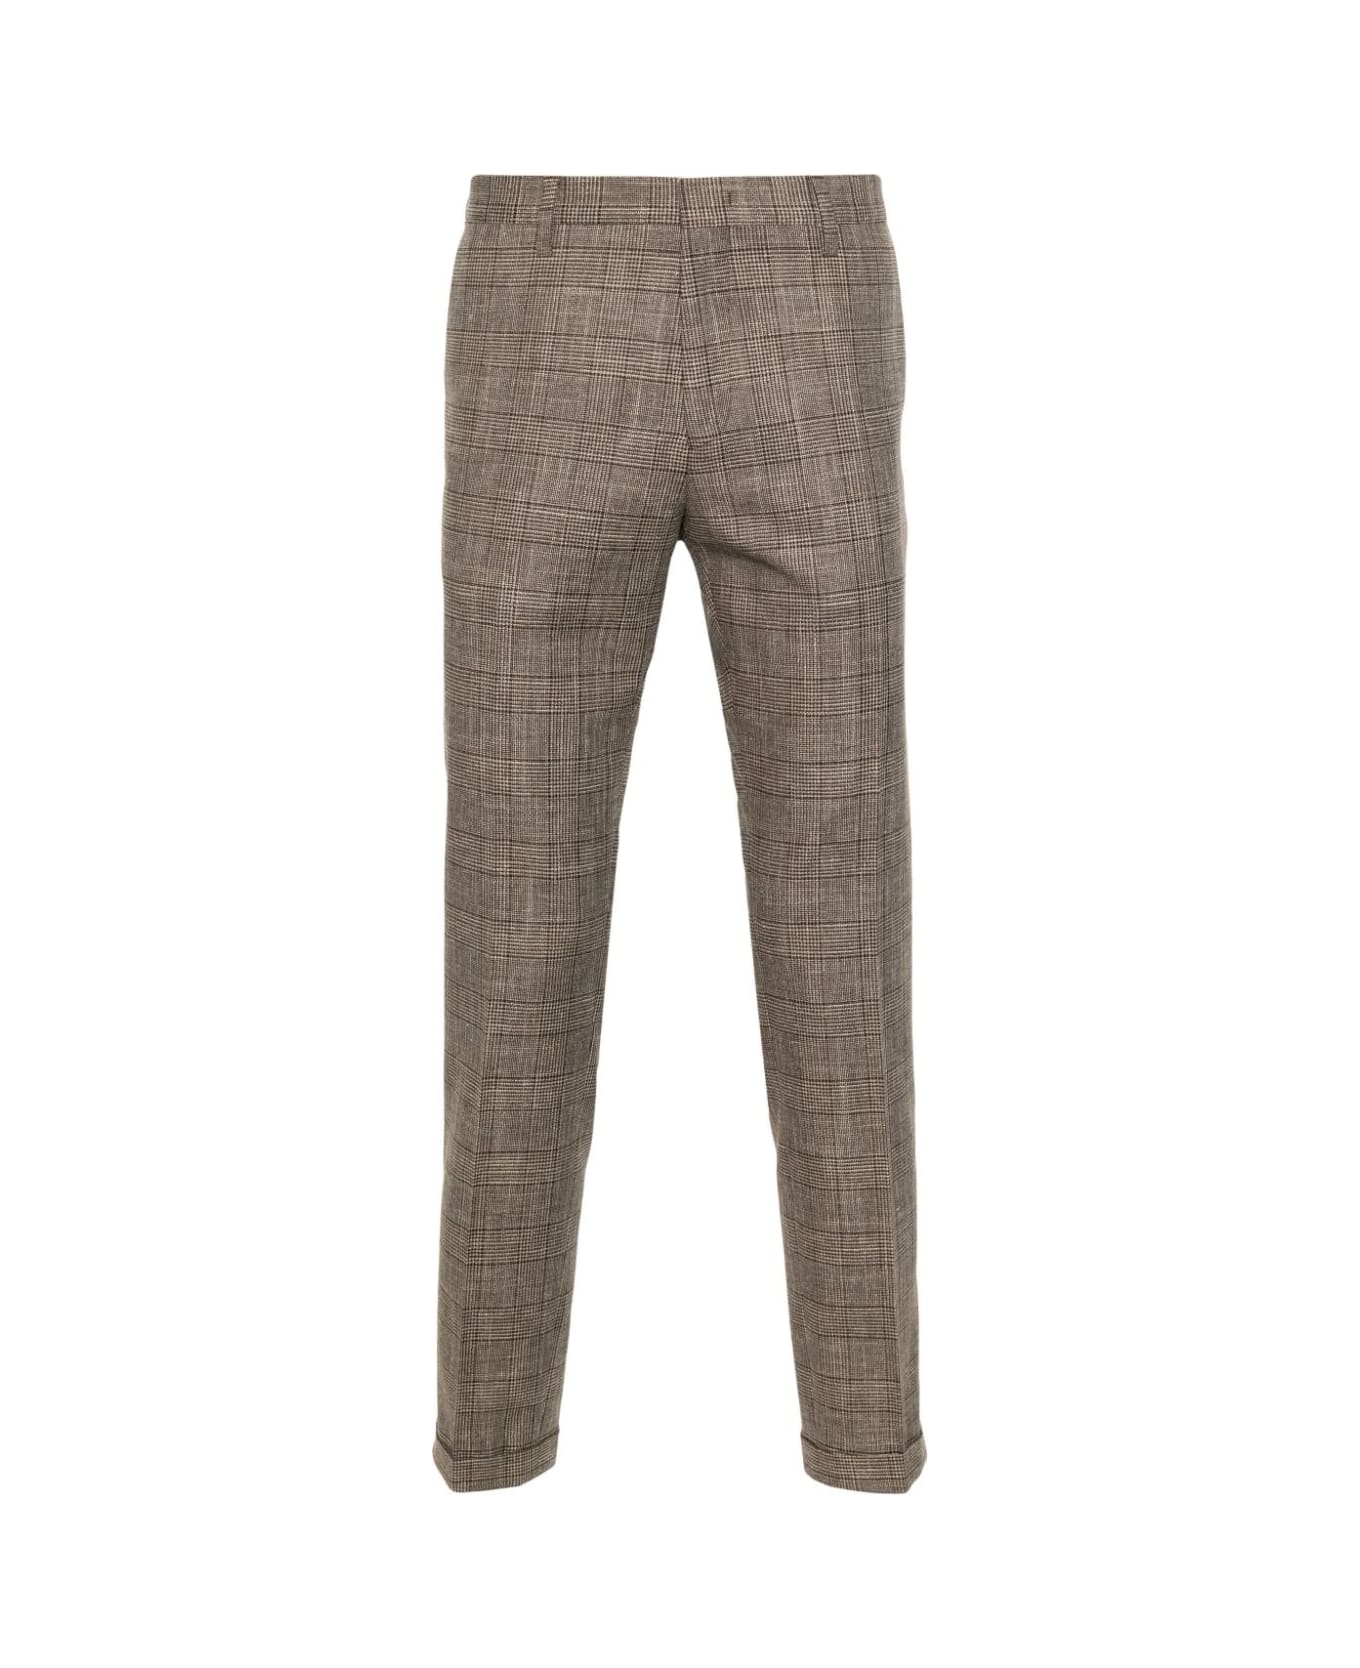 Paul Smith Mens Trousers - Brown